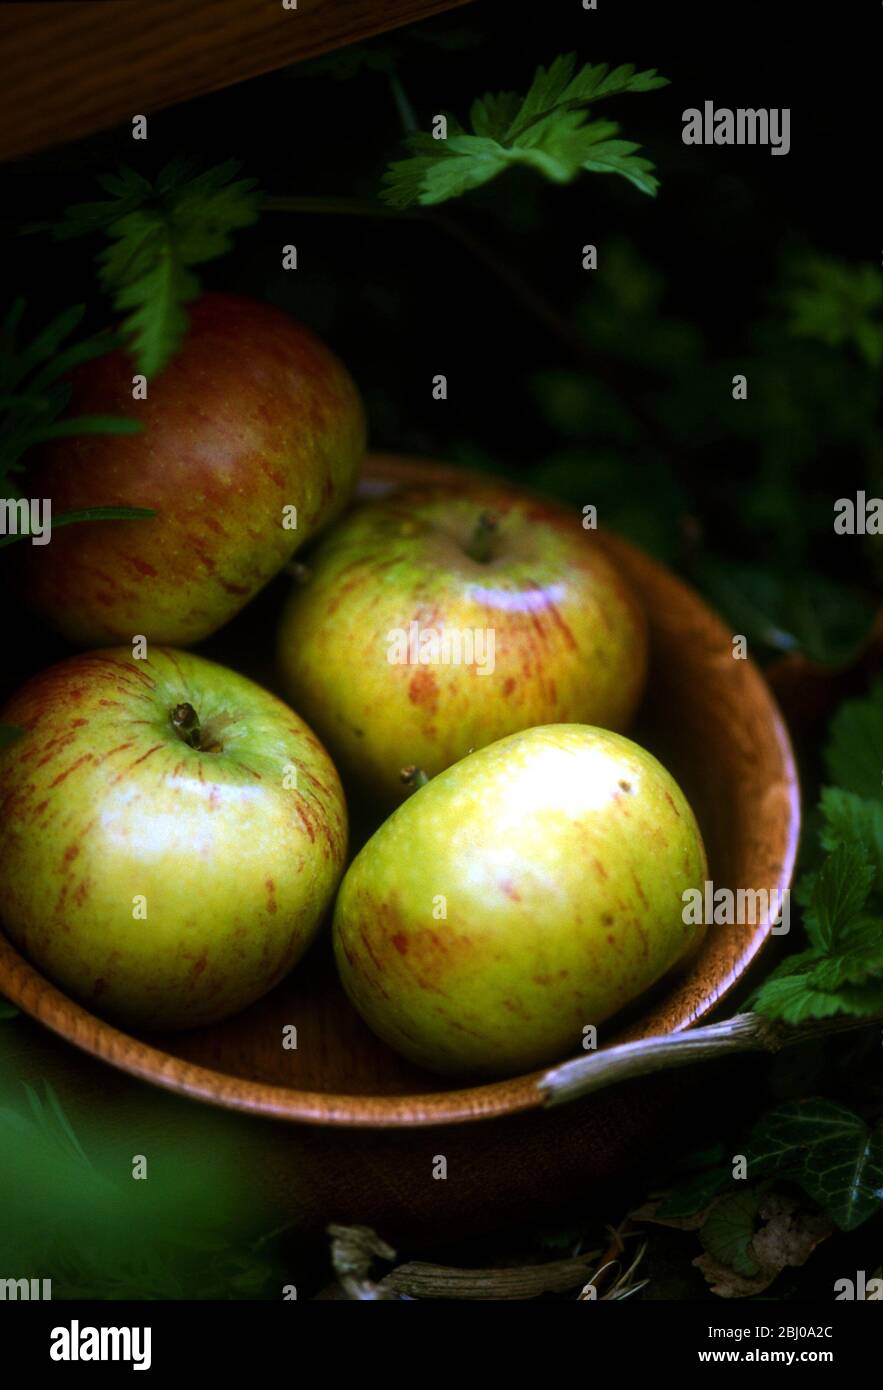 Small wooden bowl of Cox's orange pippins apples outdoors - Stock Photo